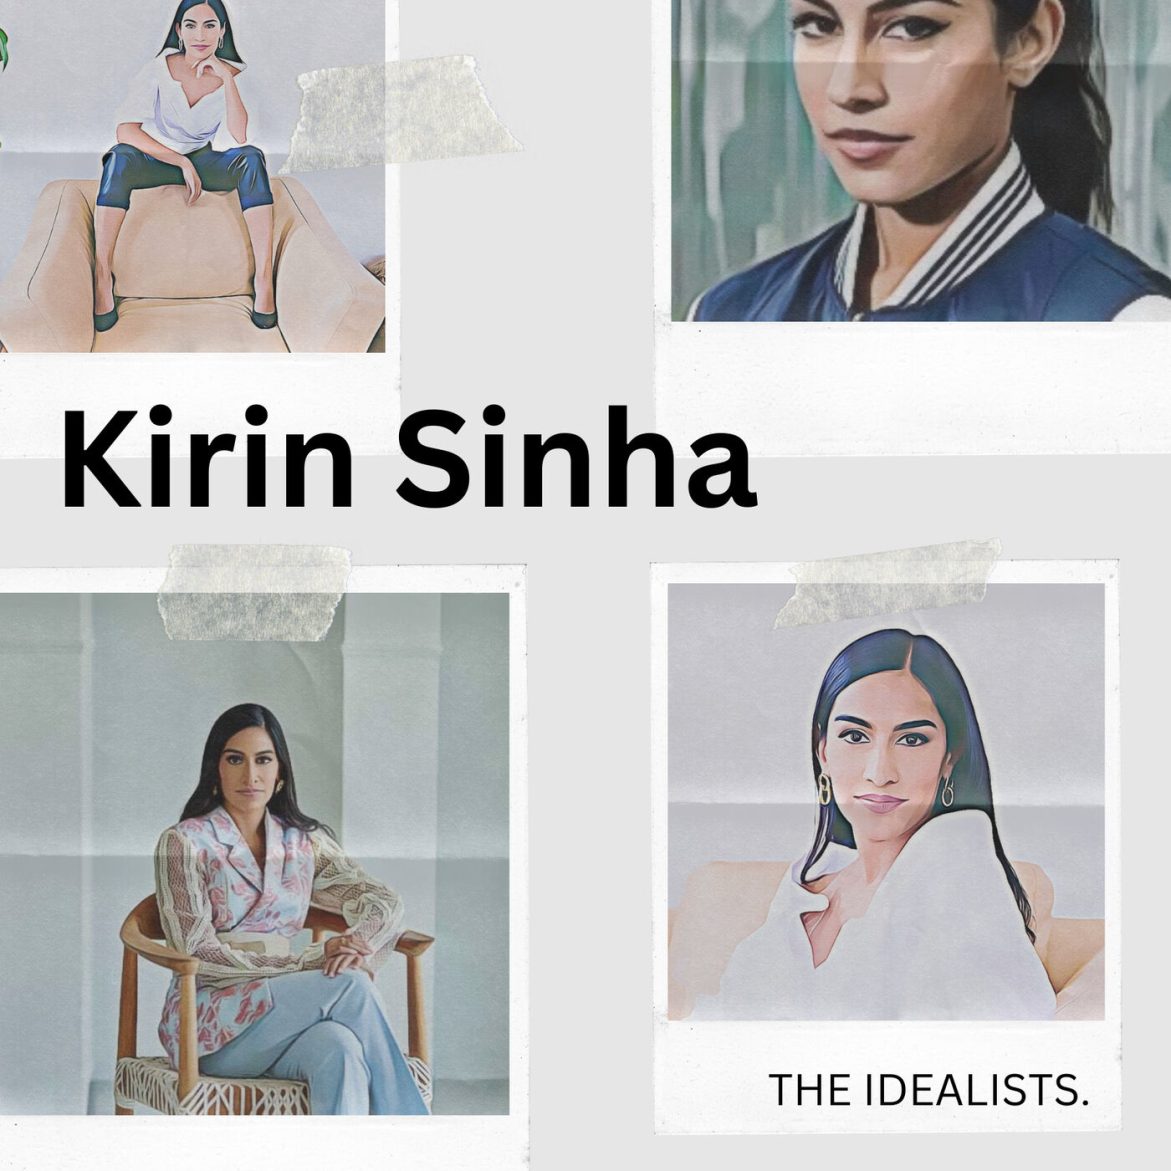 Black Podcasting - #92: Kirin Sinha on Envisioning an Ideal Life